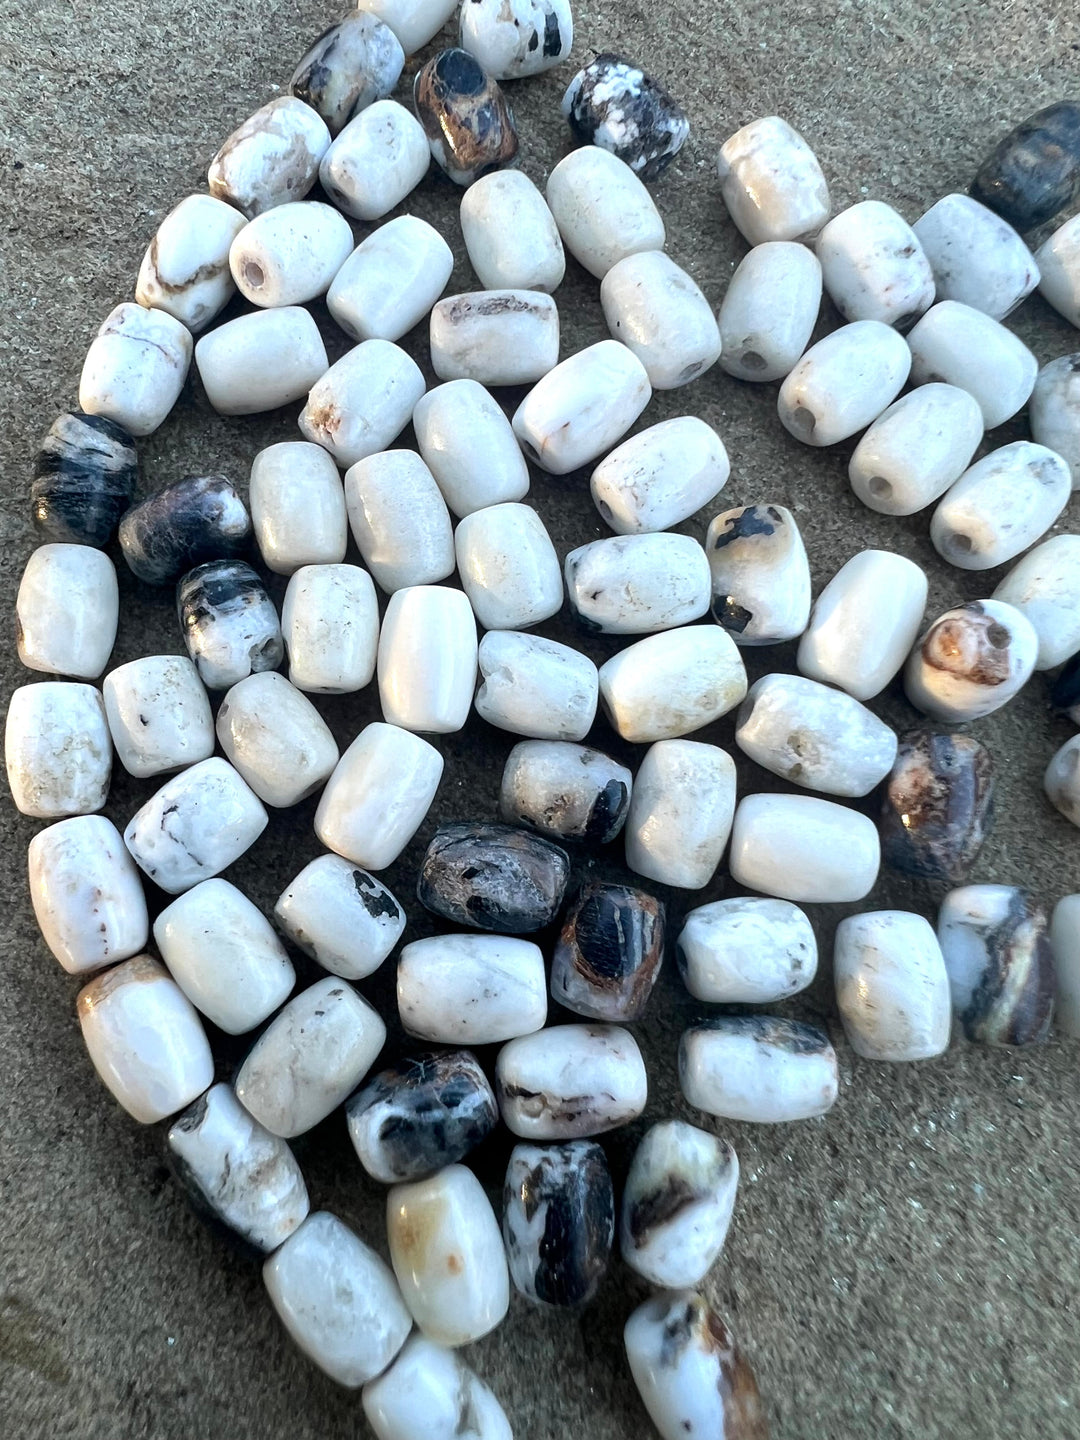 RARE High Quality White Buffalo 5x7mm Barrel Beads (Package